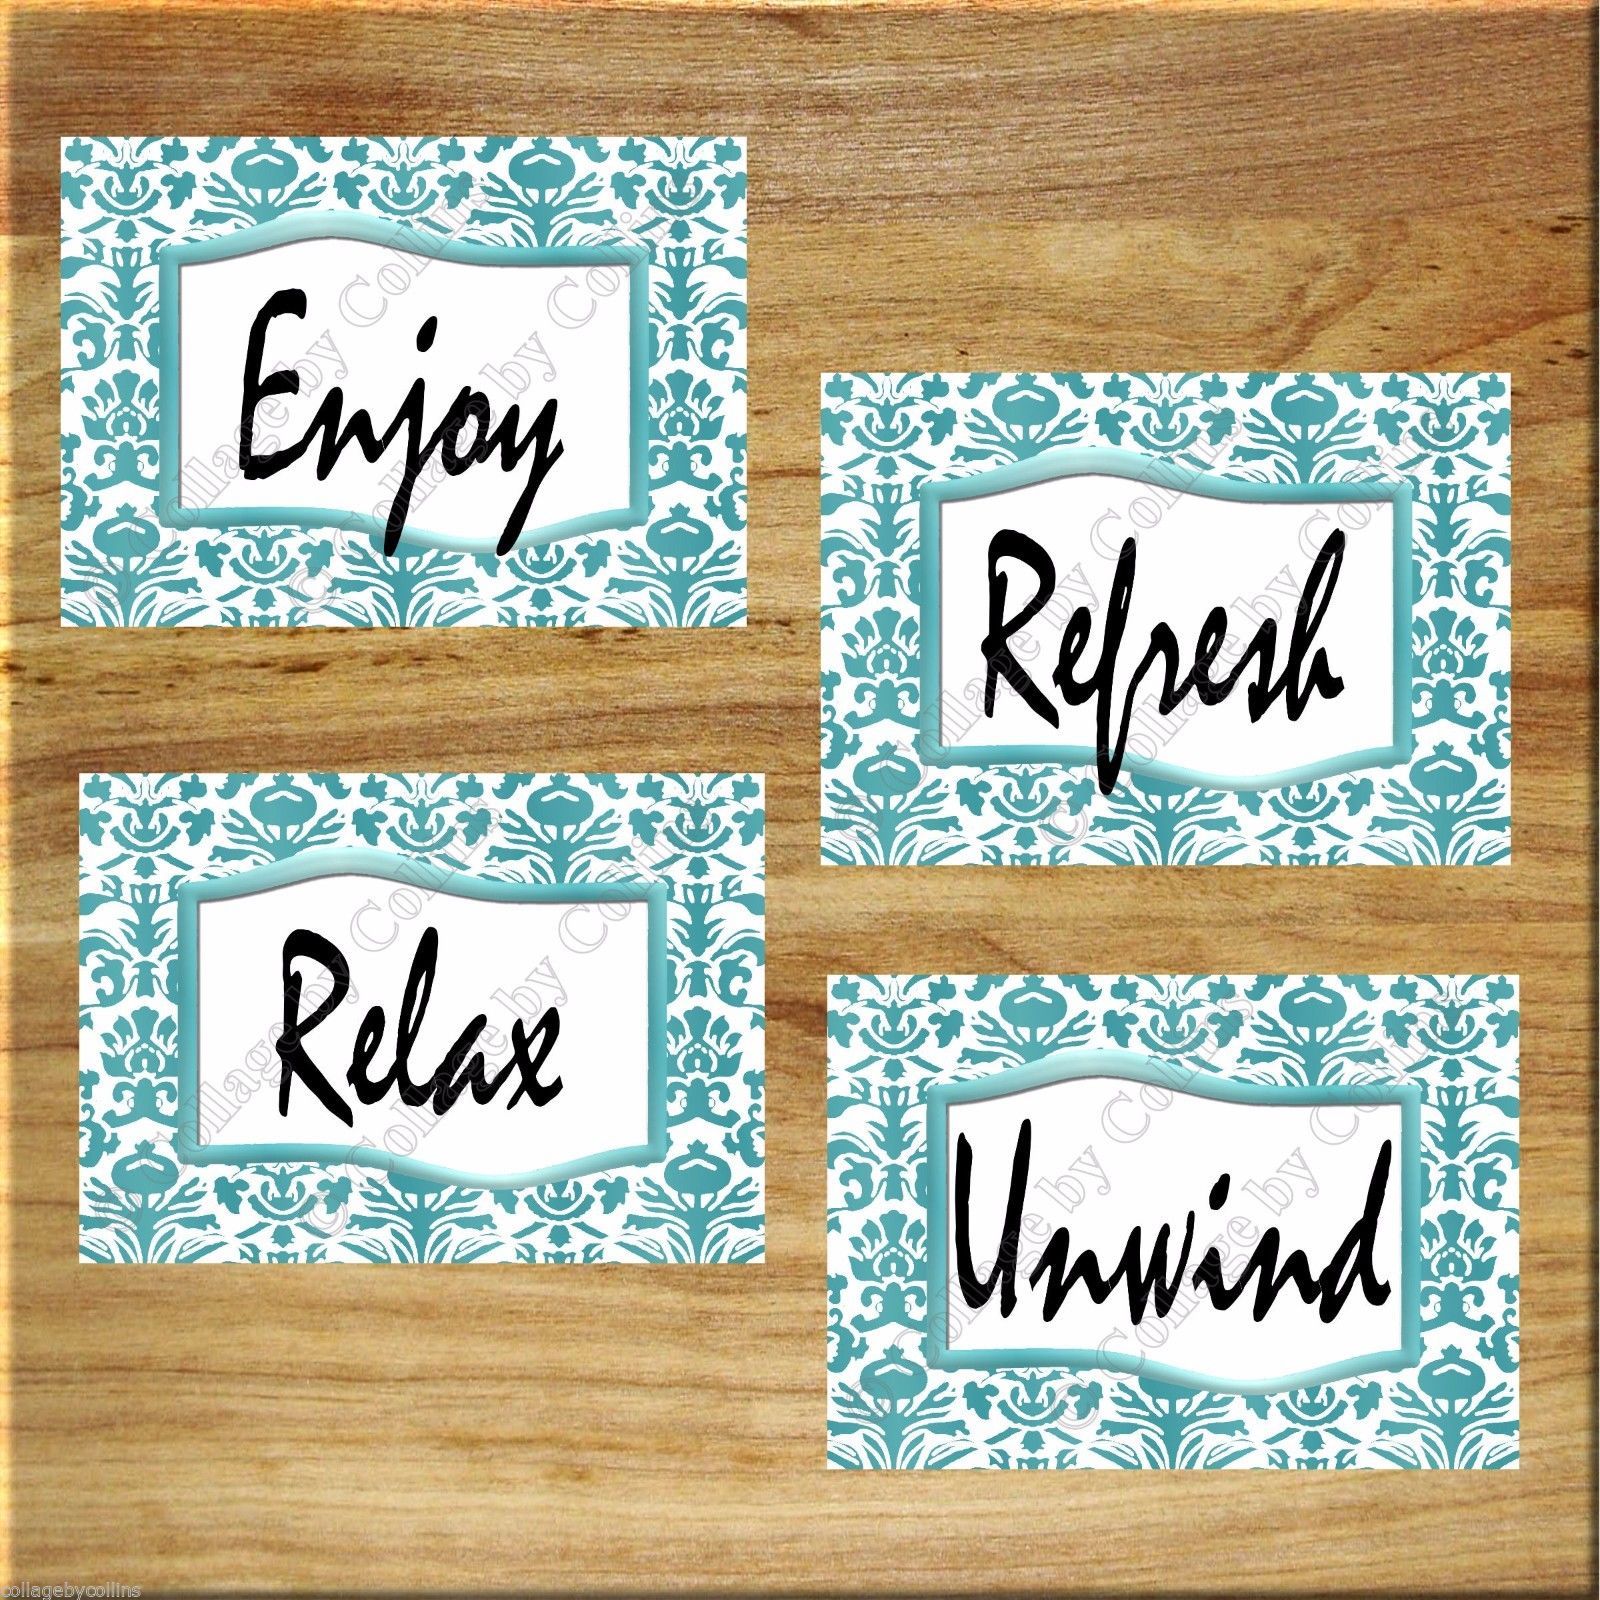 Primary image for Teal Aqua Bathroom Wall Art Prints Pictures Damask Quotes Relax Unwind Refresh +